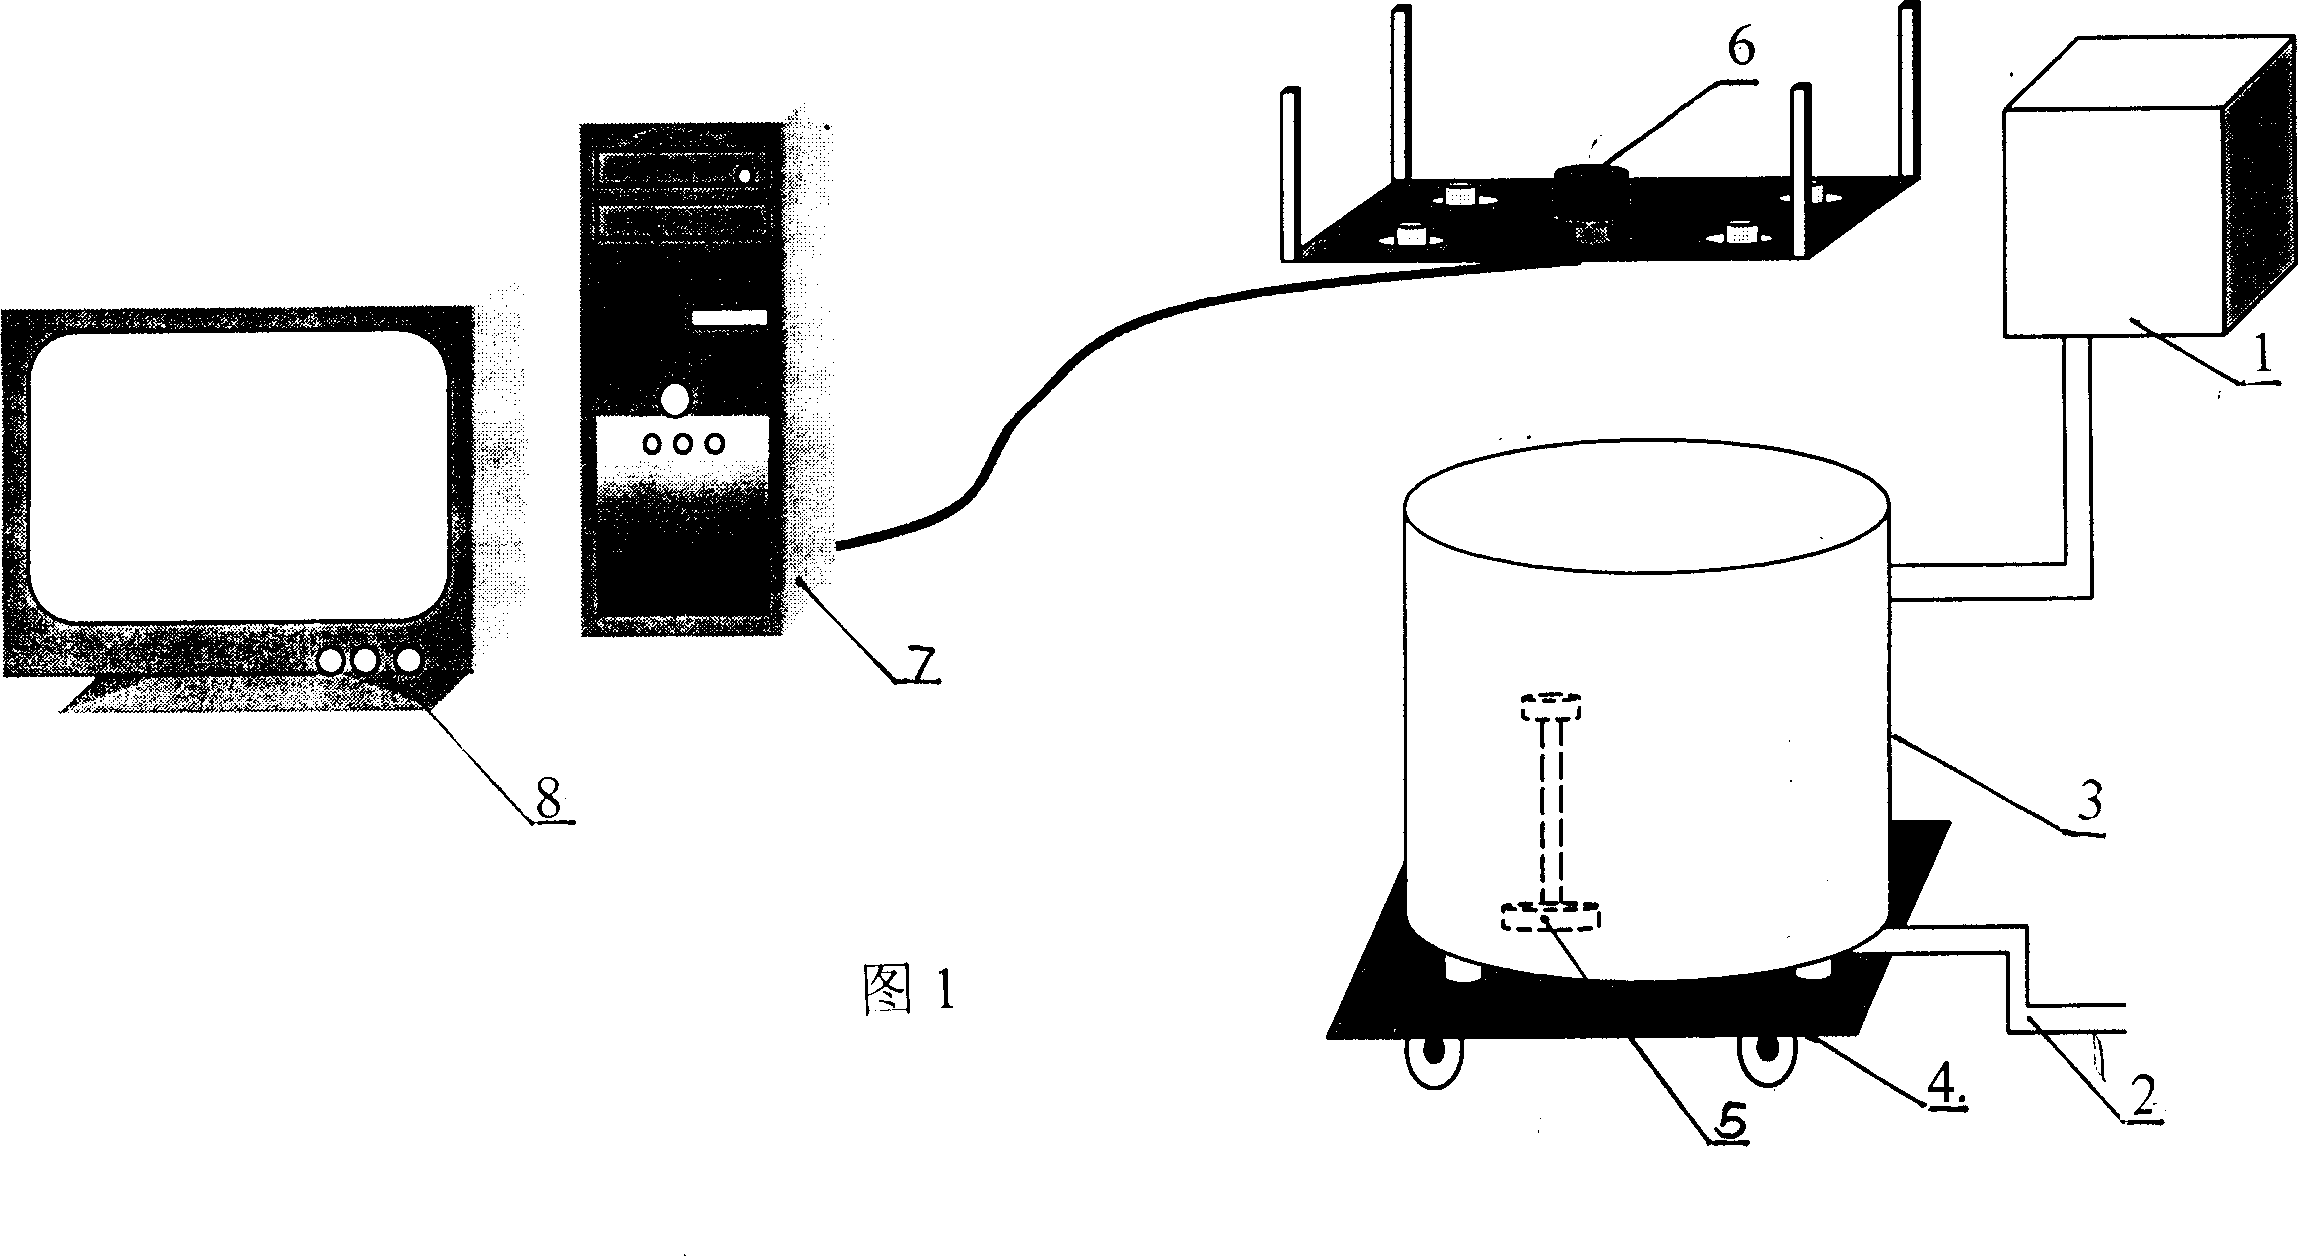 Automatic water maze image processing system and method